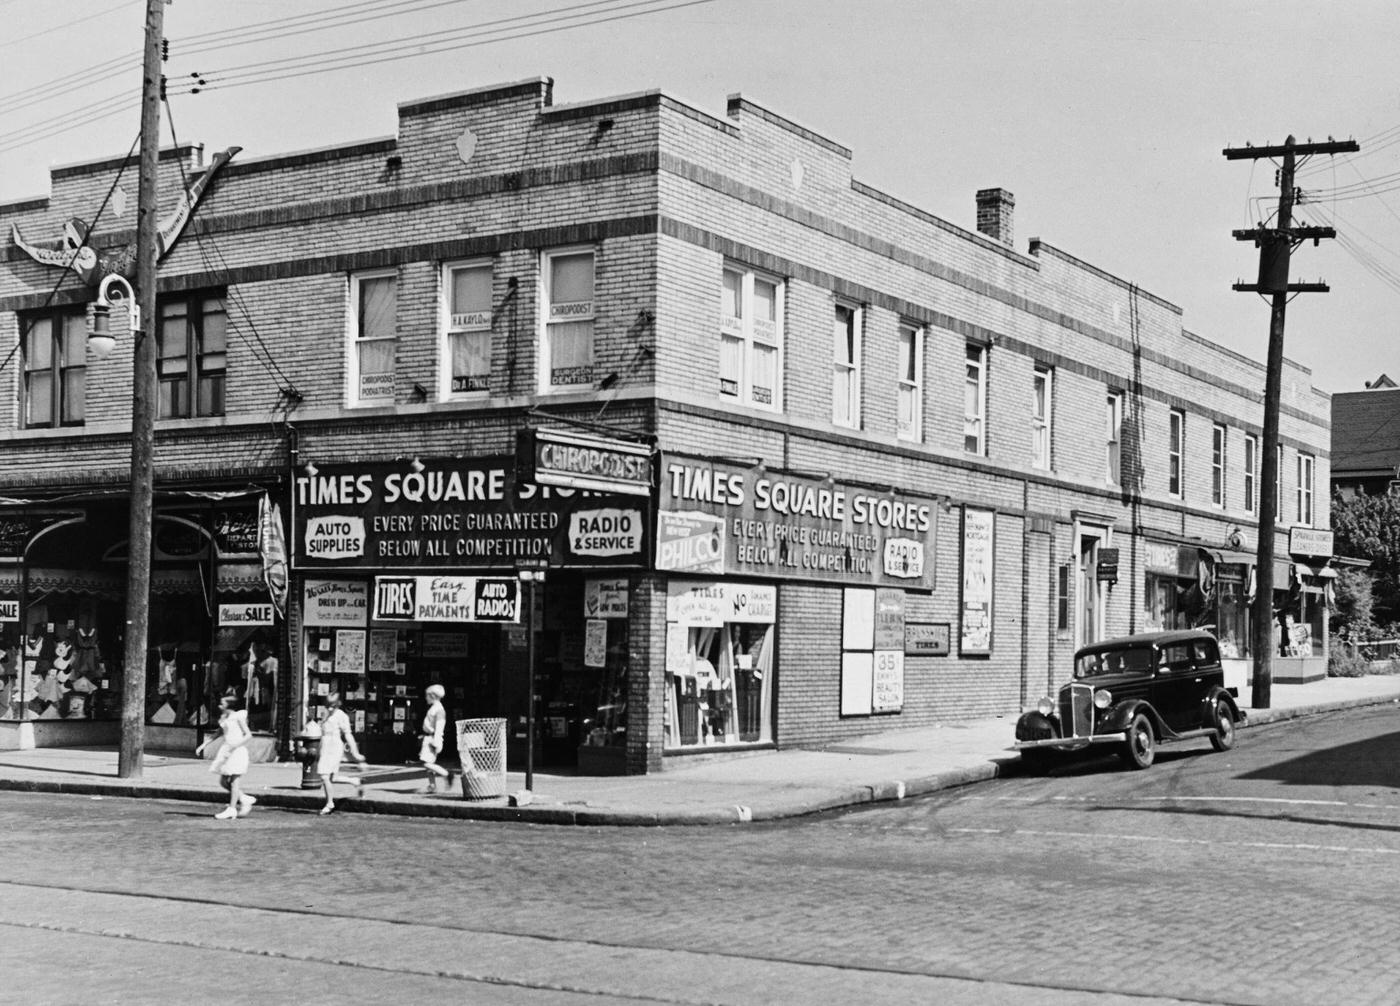 Times Square Stores At The Intersection Of Vreeland Street And Richmond Avenue, Port Richmond, Staten Island, 1936.